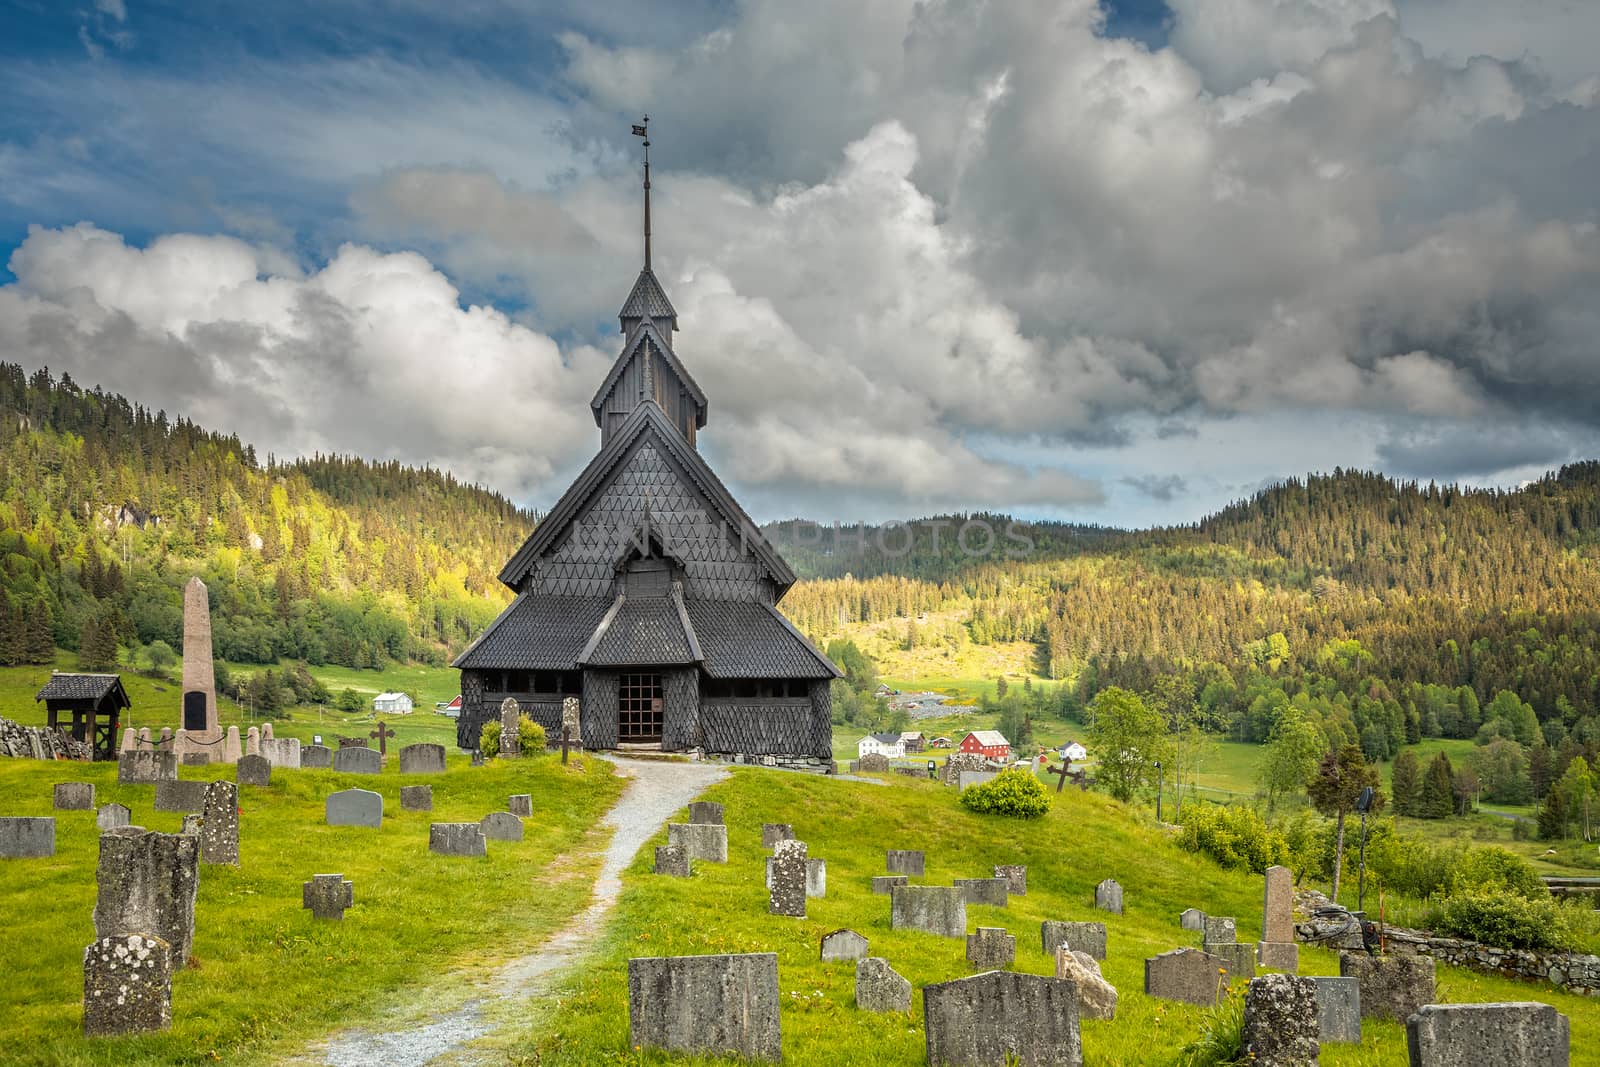 Eidsborg medieval wooden Stave Church and graveyard in front with green forest and cloud sky in the backround, Tokke, Telemark county, Norway